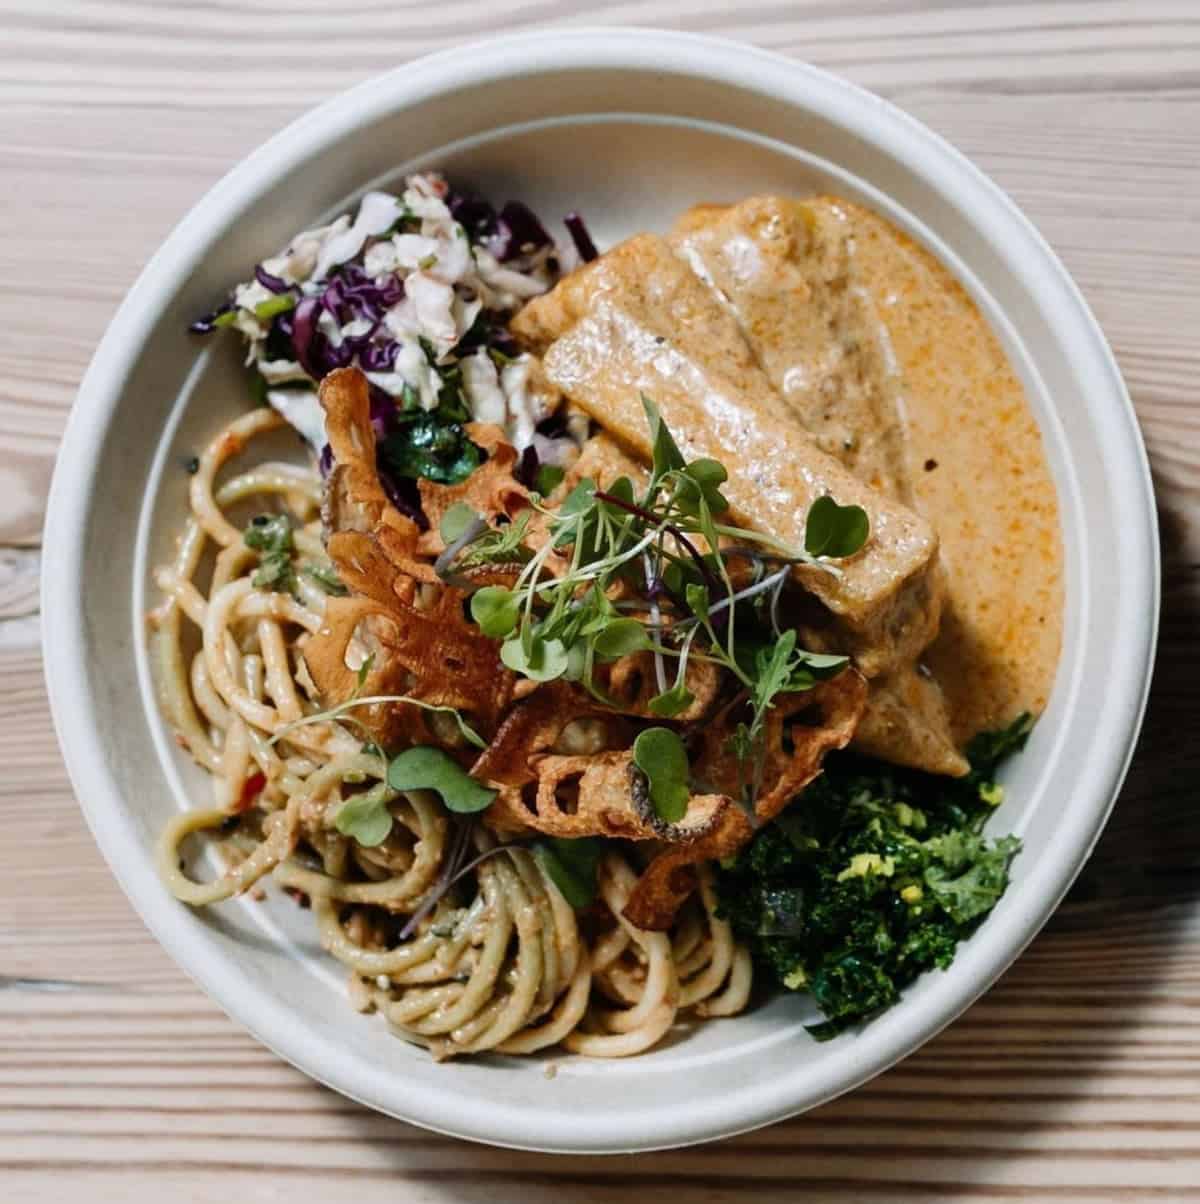 The Bangkok Curry Bowl from Plant Junkie in Chicago.